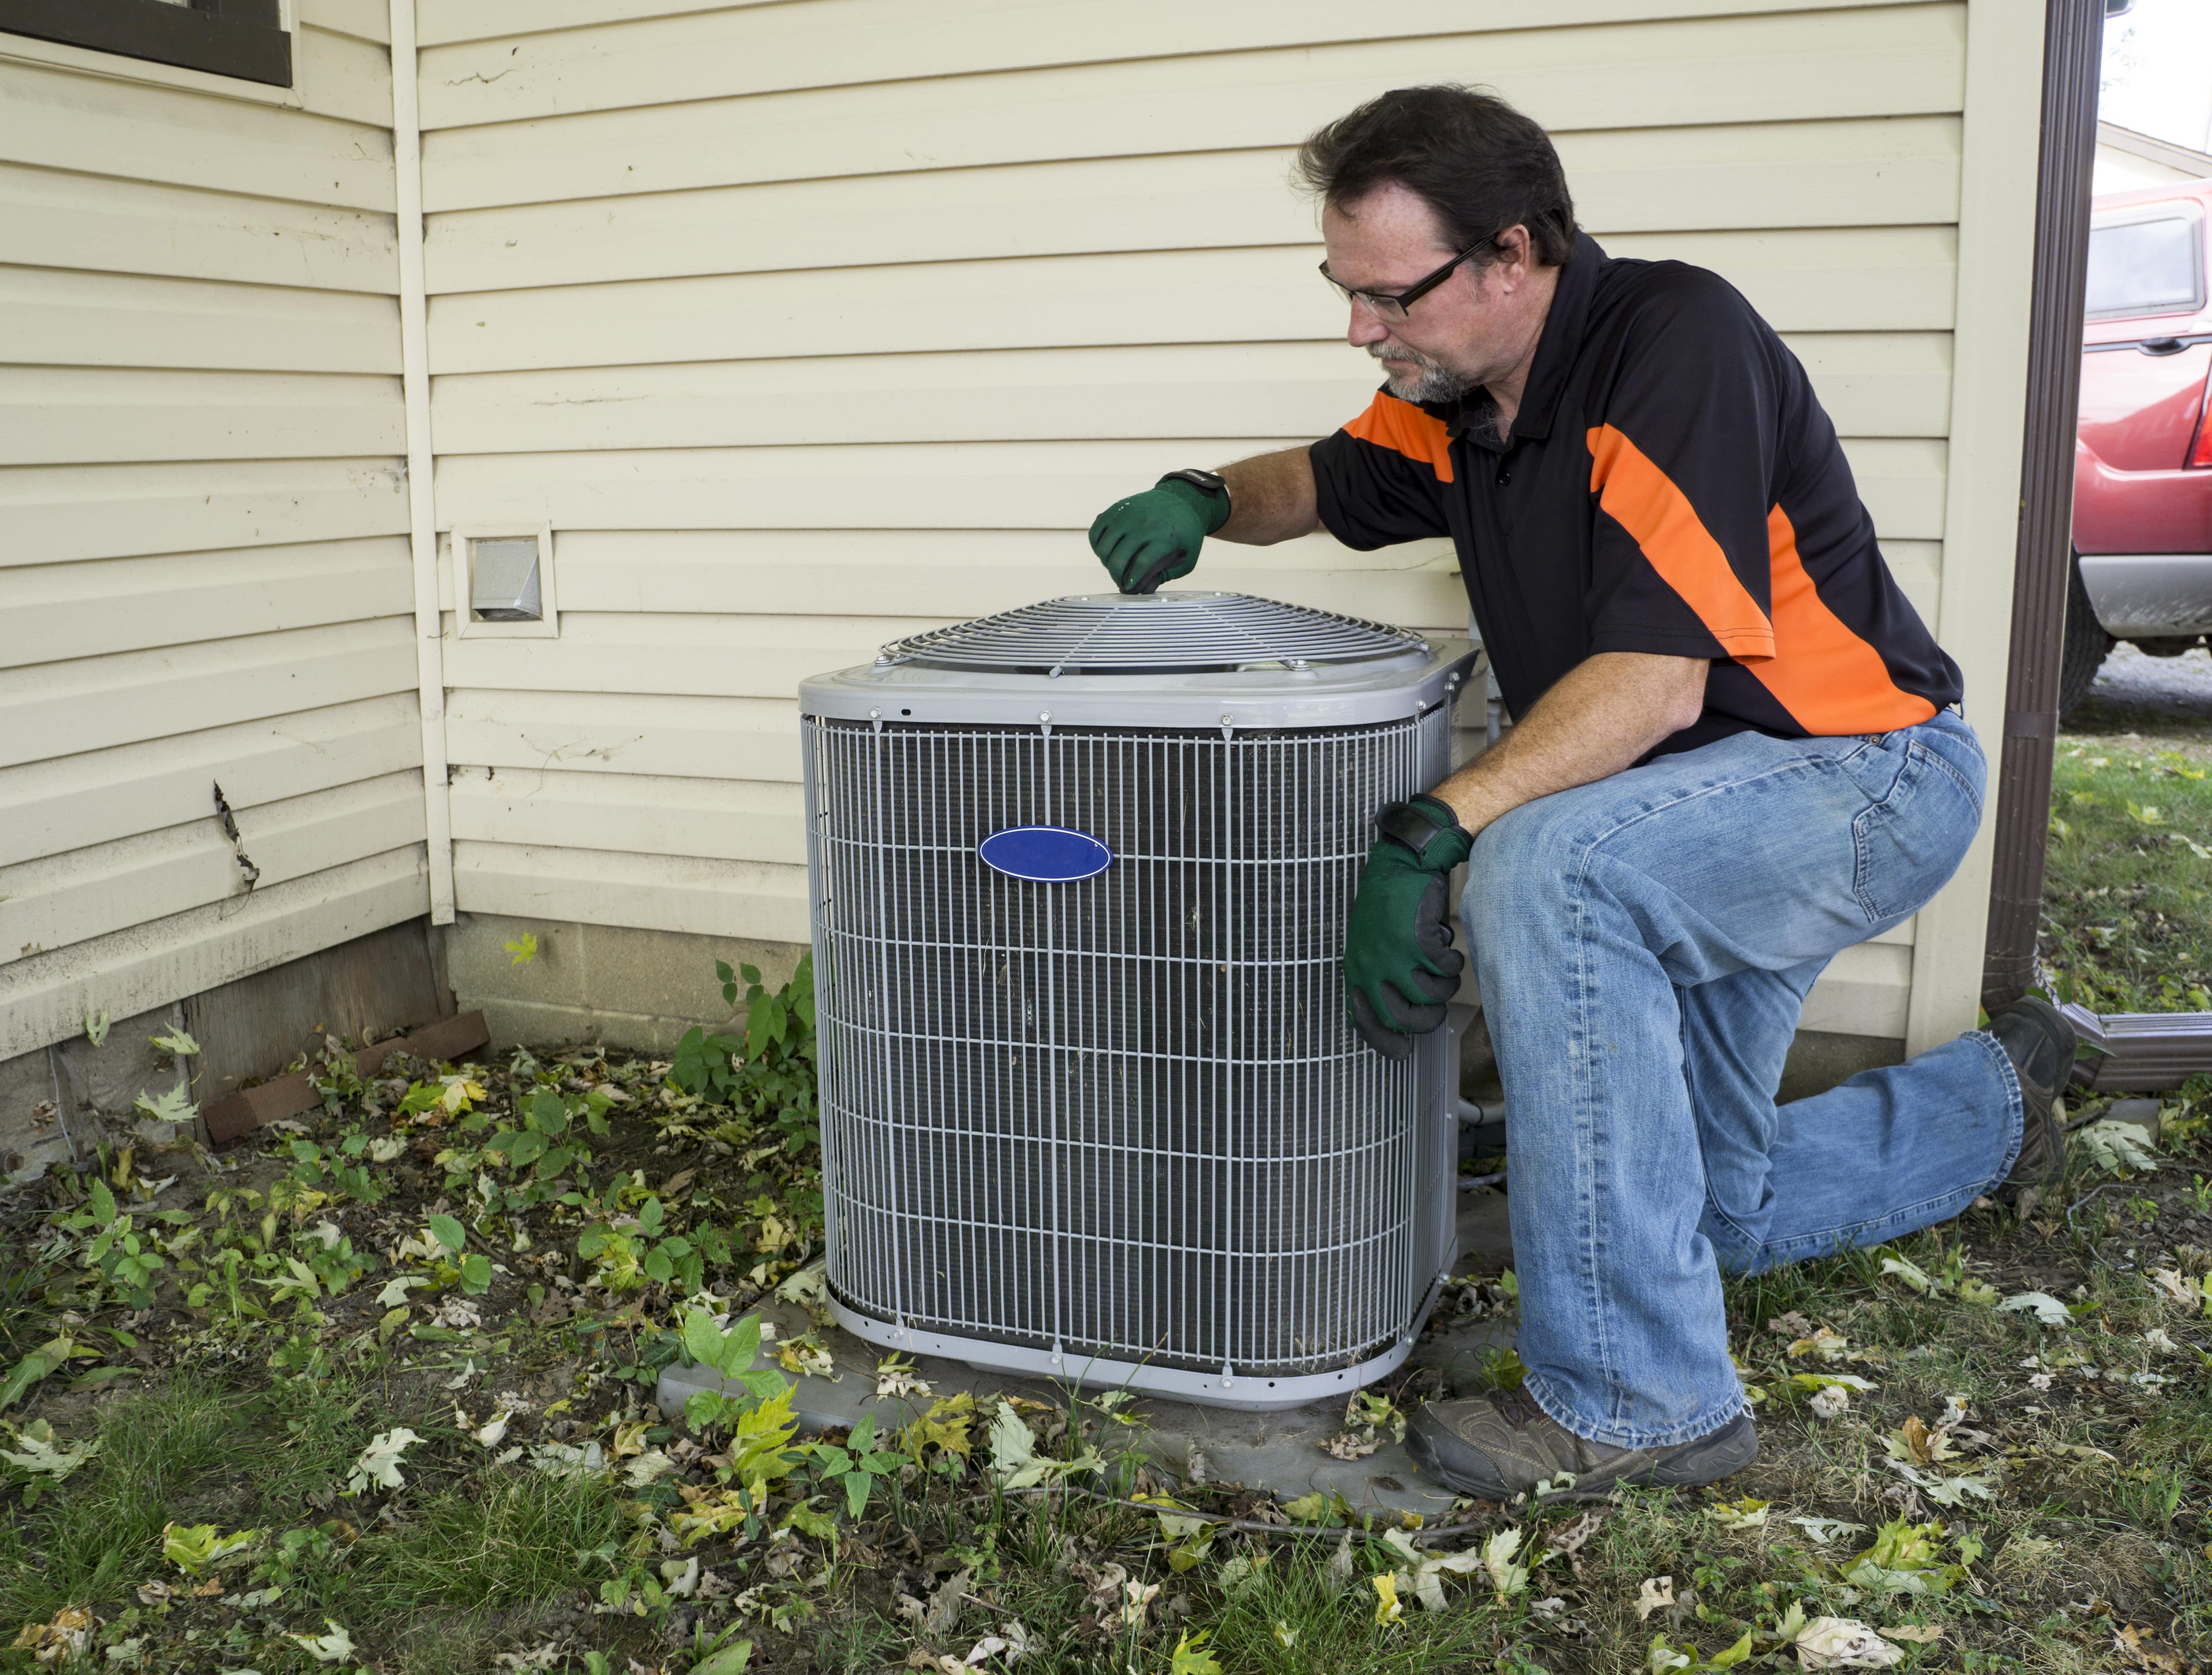  How Do I Know If I Need A New Hvac System? Tips and Tricks thumbnail